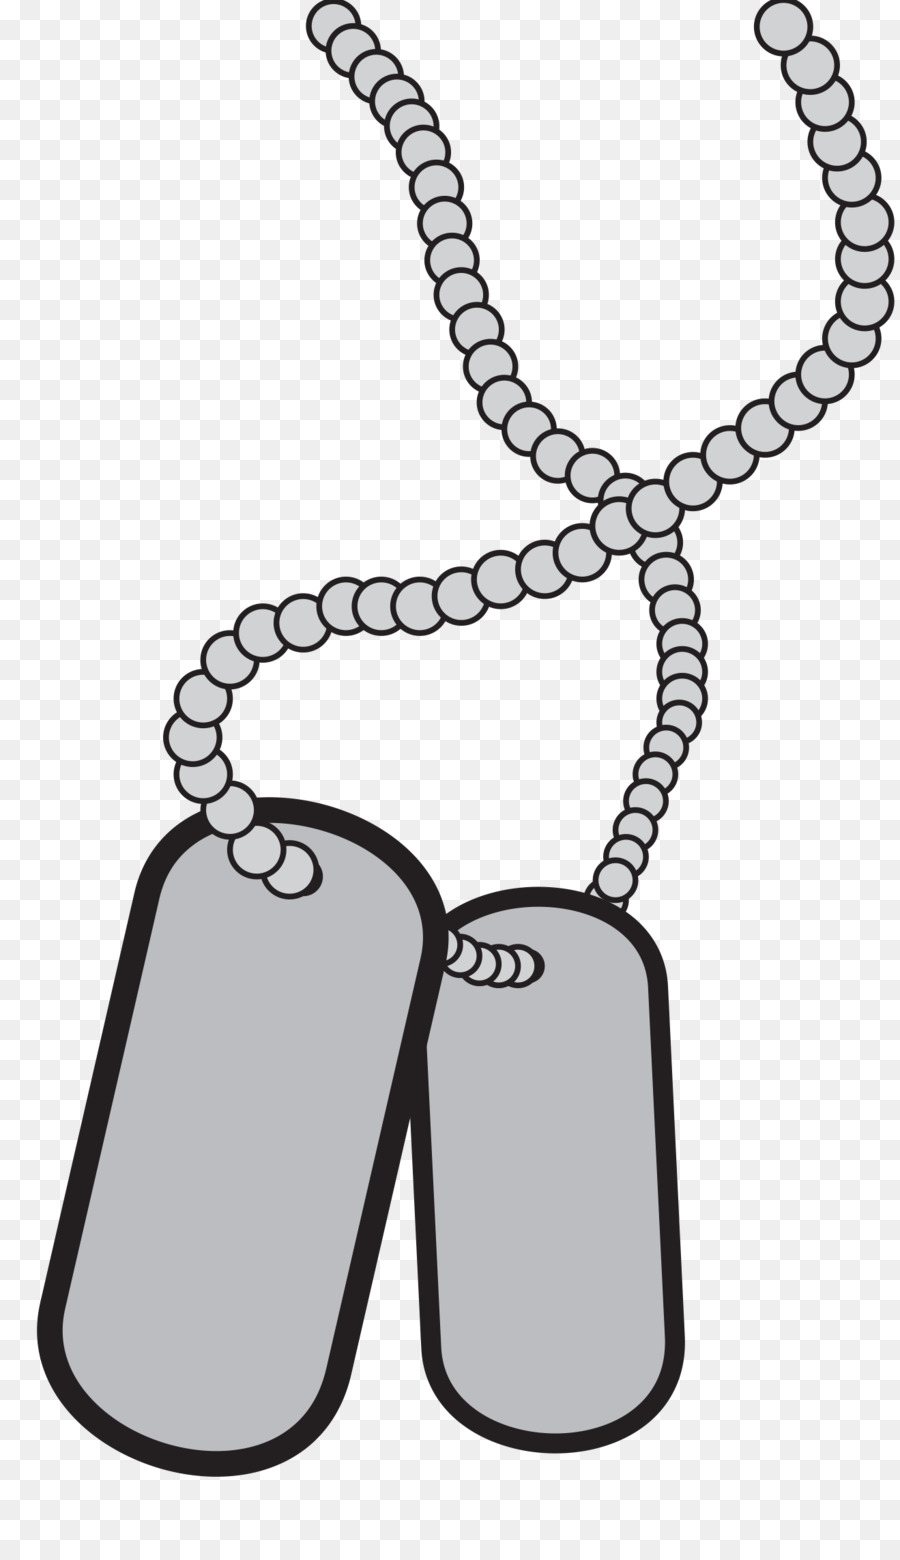 Free Dog Tag Silhouette, Download Free Dog Tag Silhouette png images